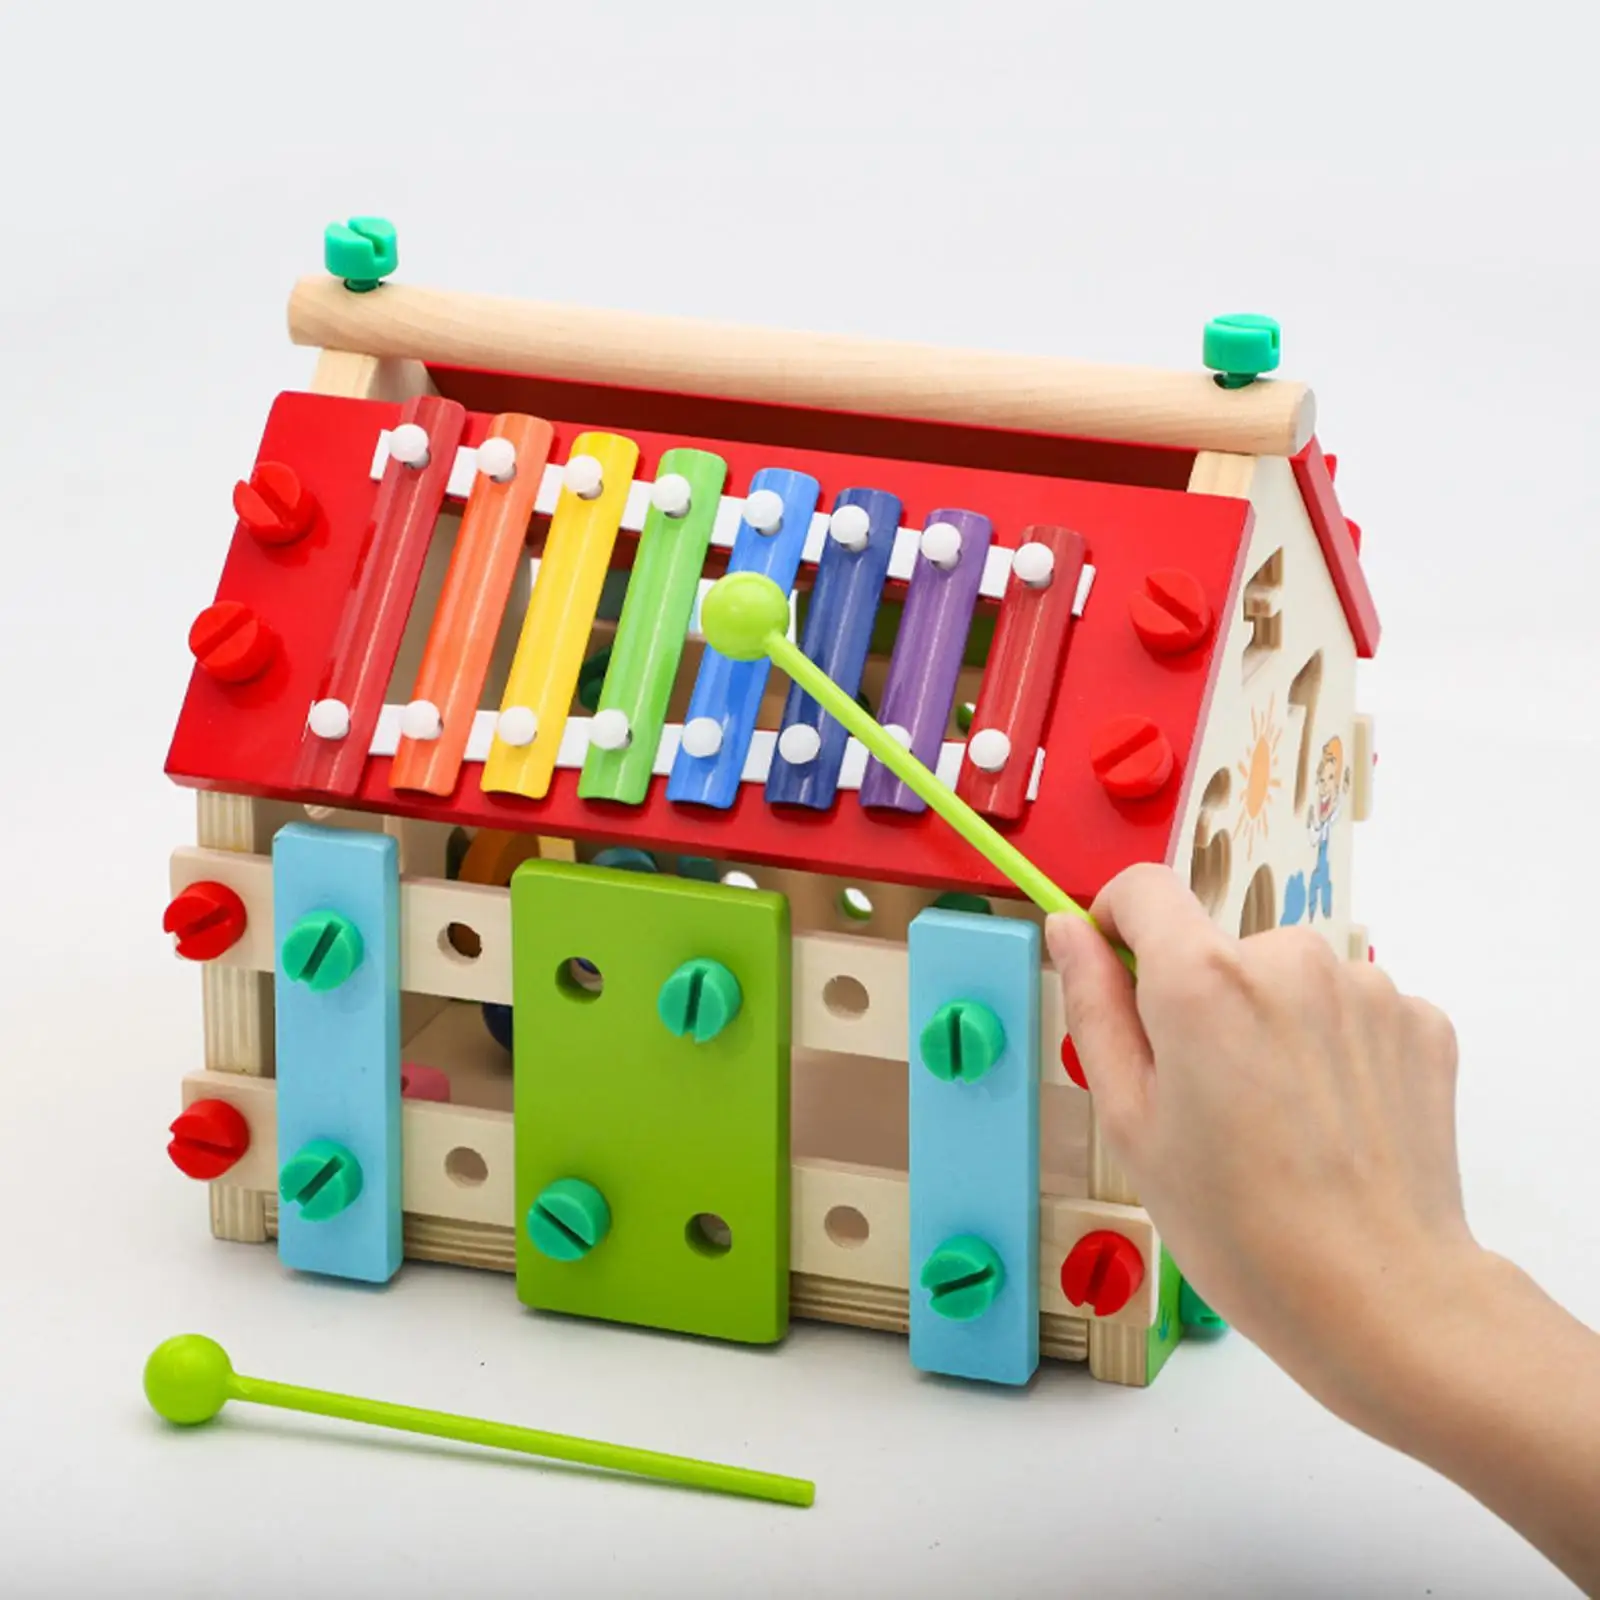 Musical Activity Cube Toy Early Learning Educational Toy Shape Sorter Play Center Toy for Kids Birthday Gift Children